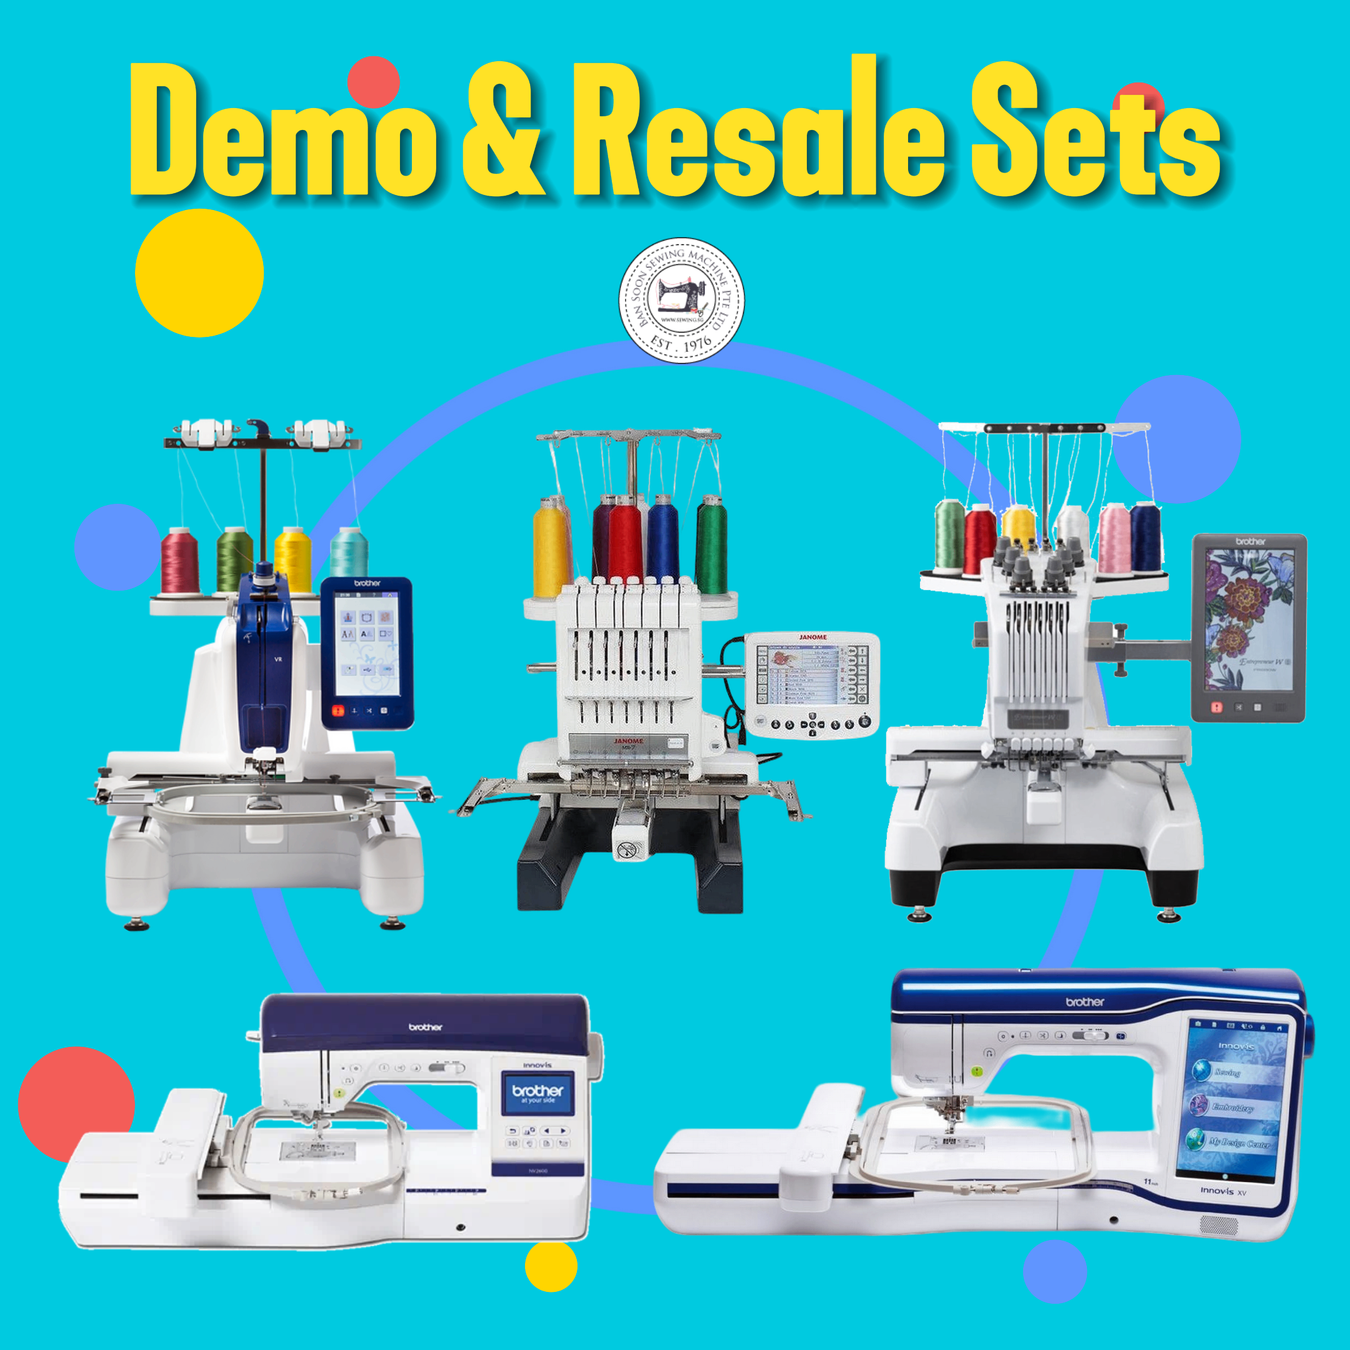 Embroidery Machines Demo & Resale Sets